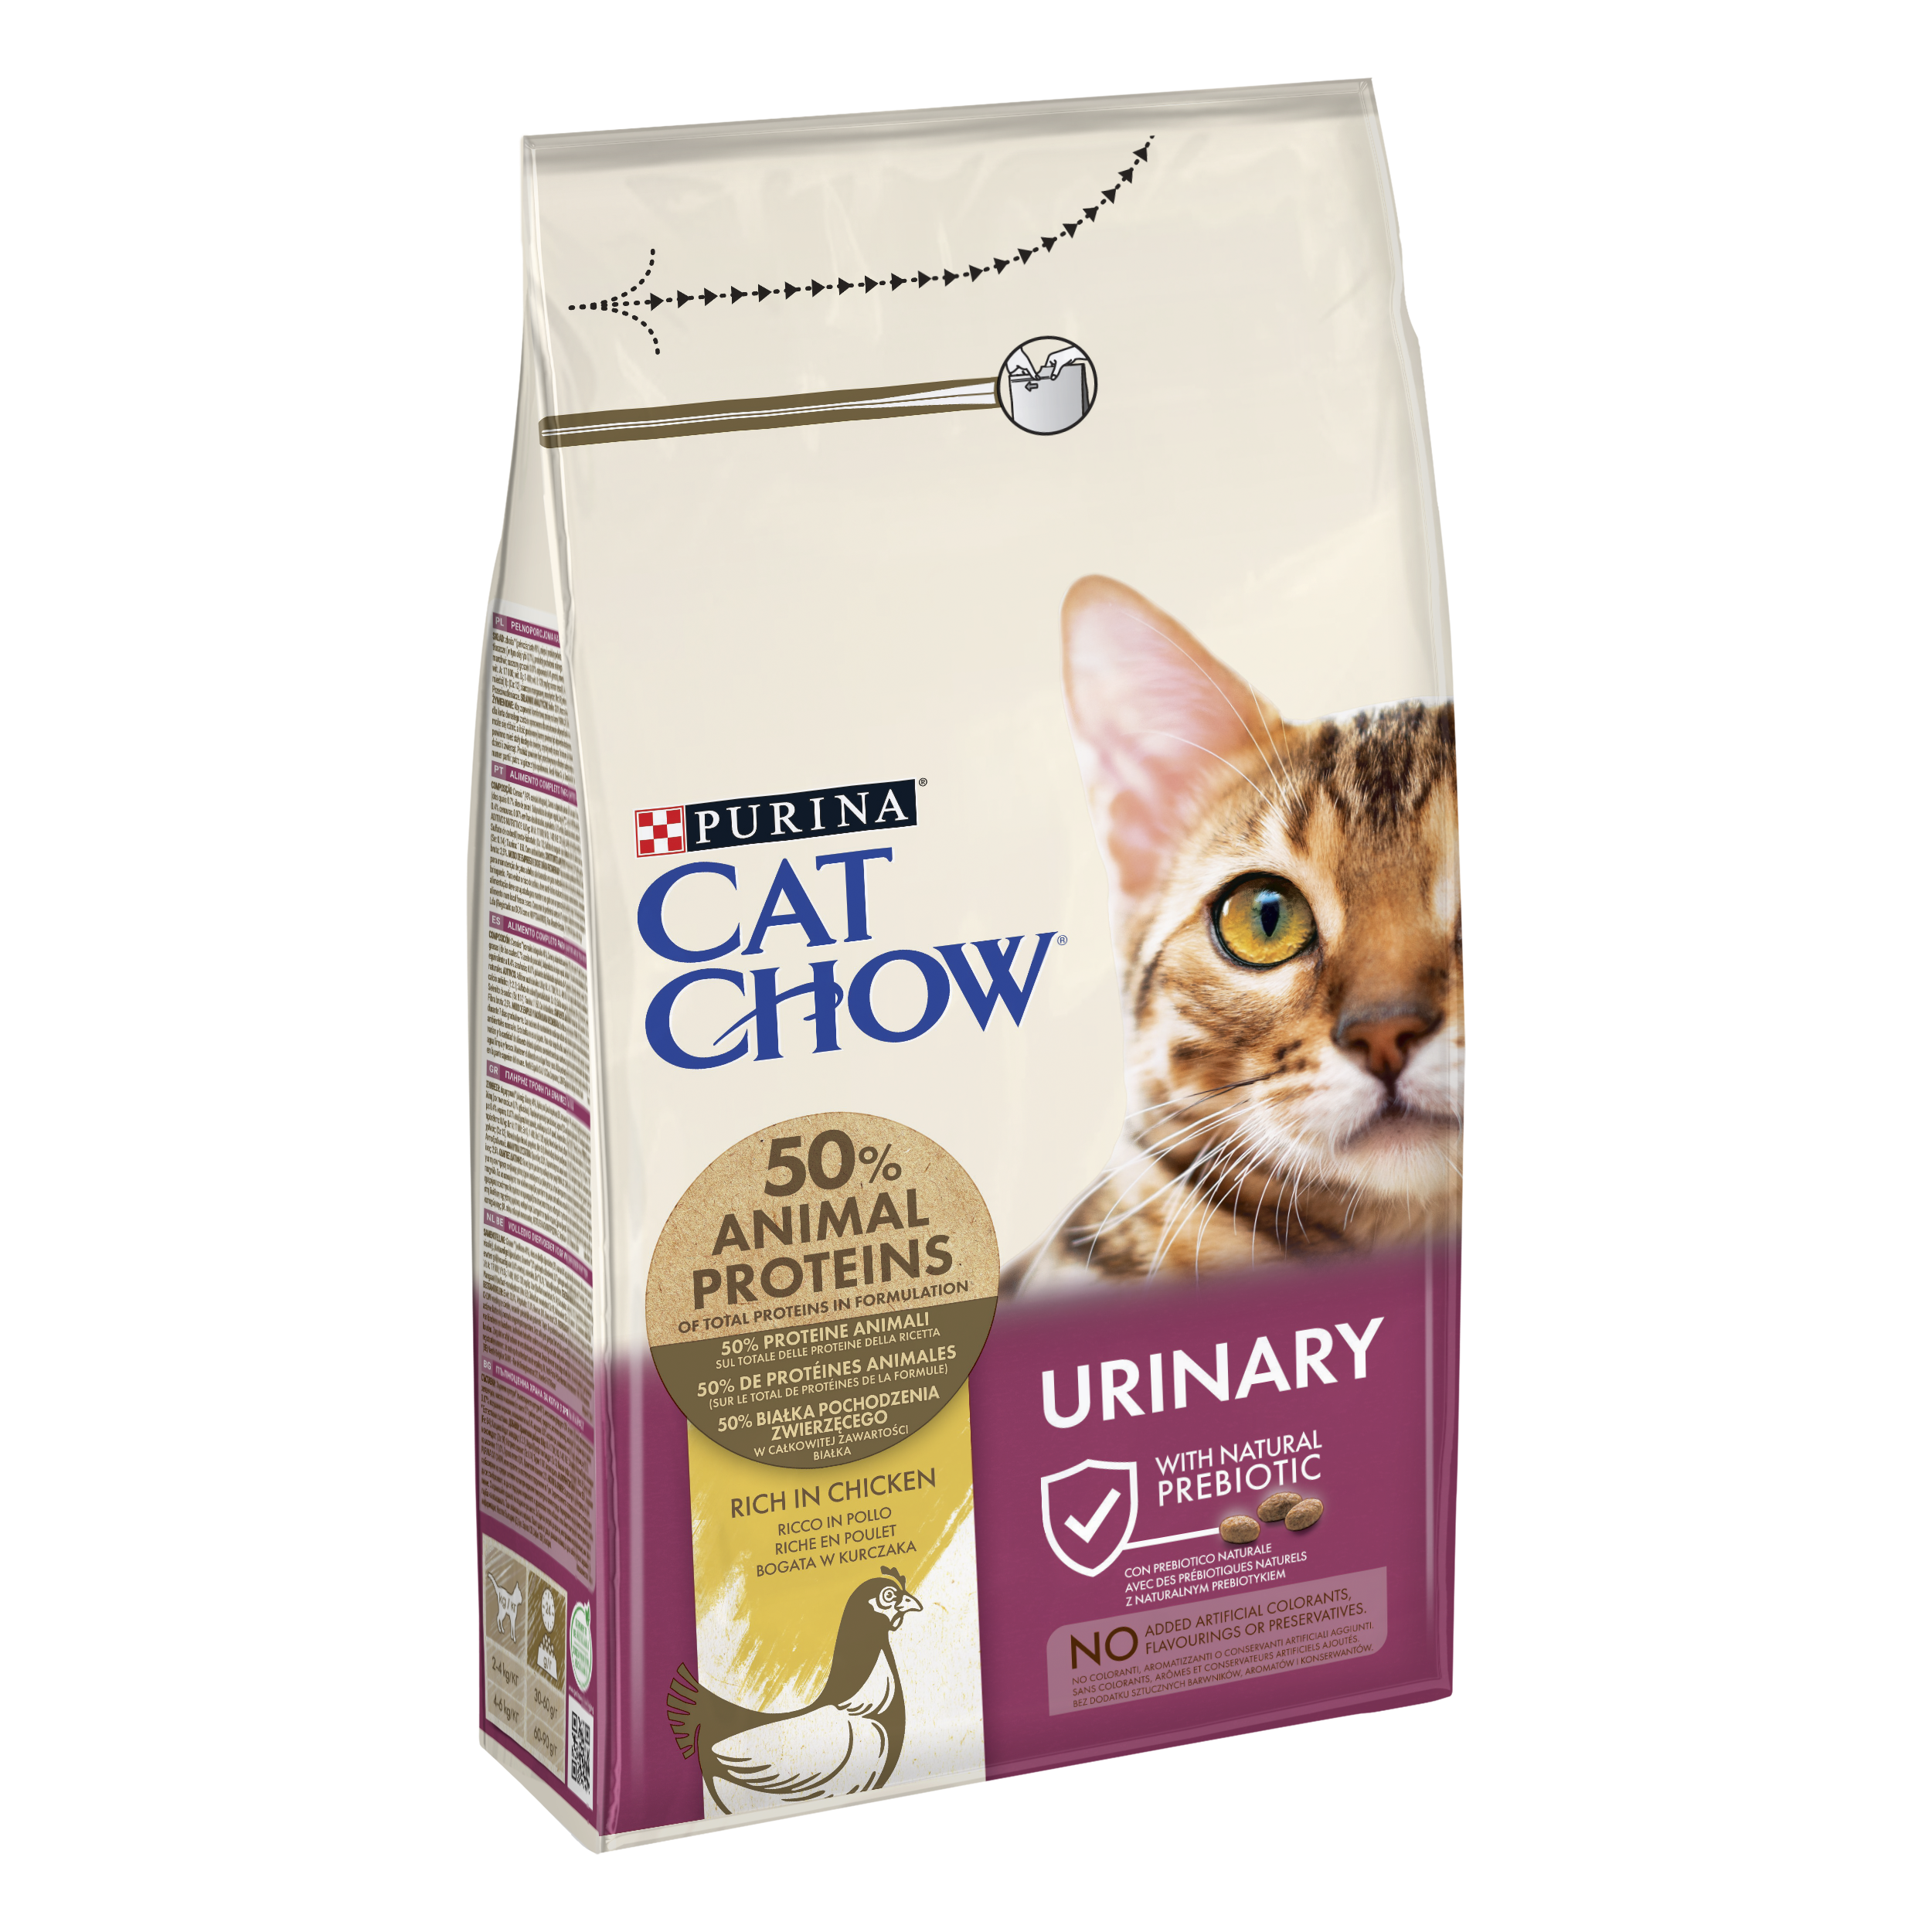 Cat Chow Urinary Tract Health